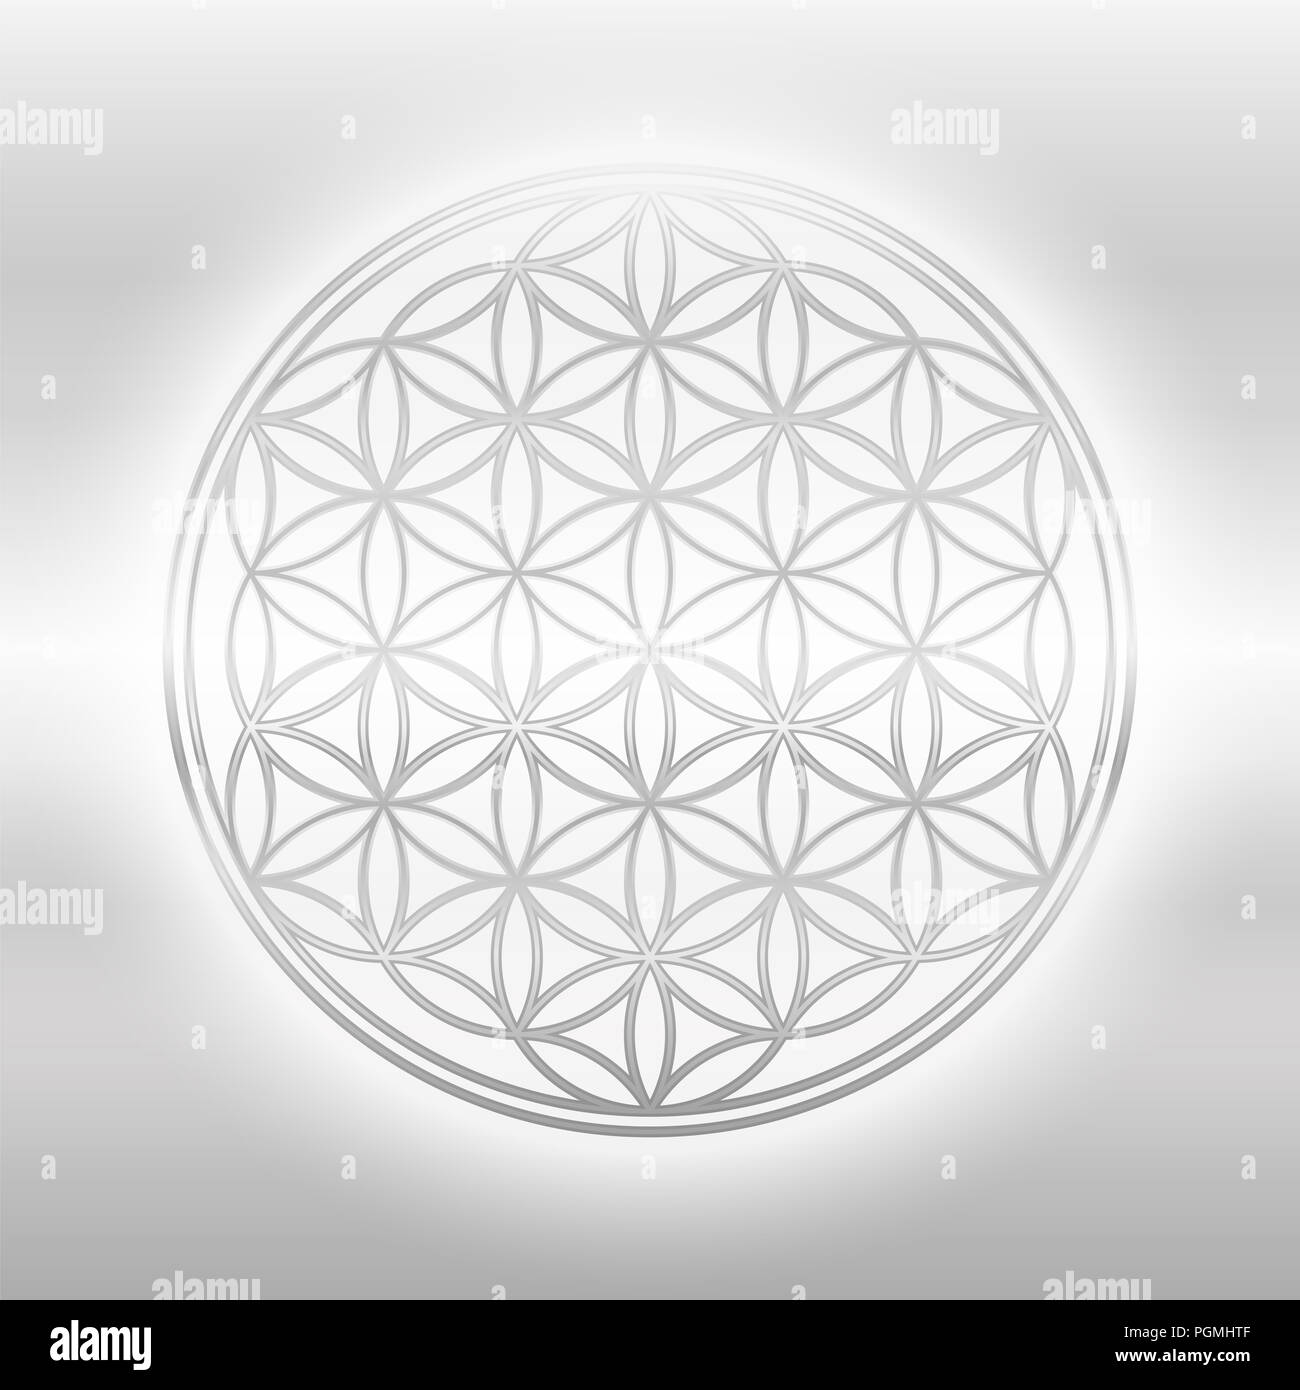 Flower of Life, silver glance symbol on silvery background. Stock Photo